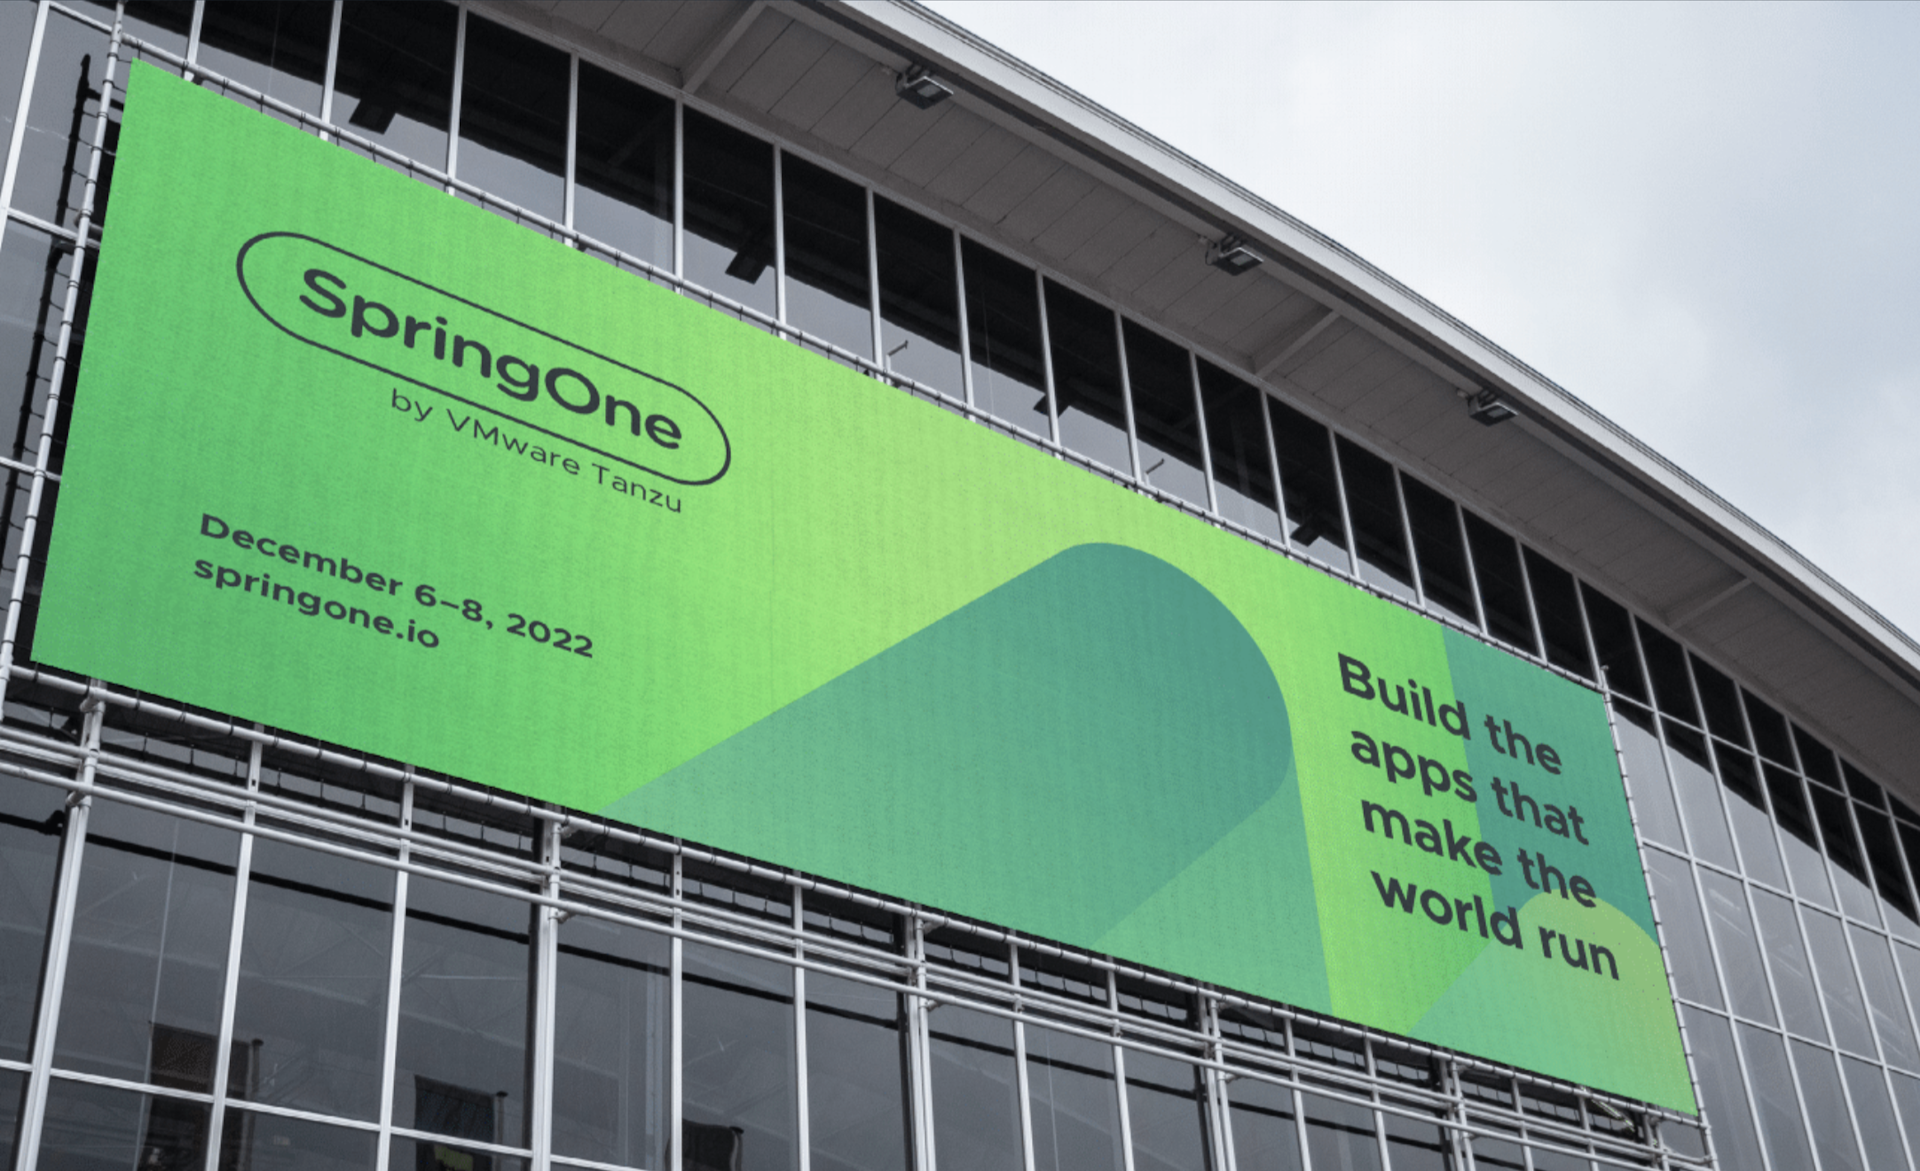 SpringOne Conference Redesign Boosts Attendance